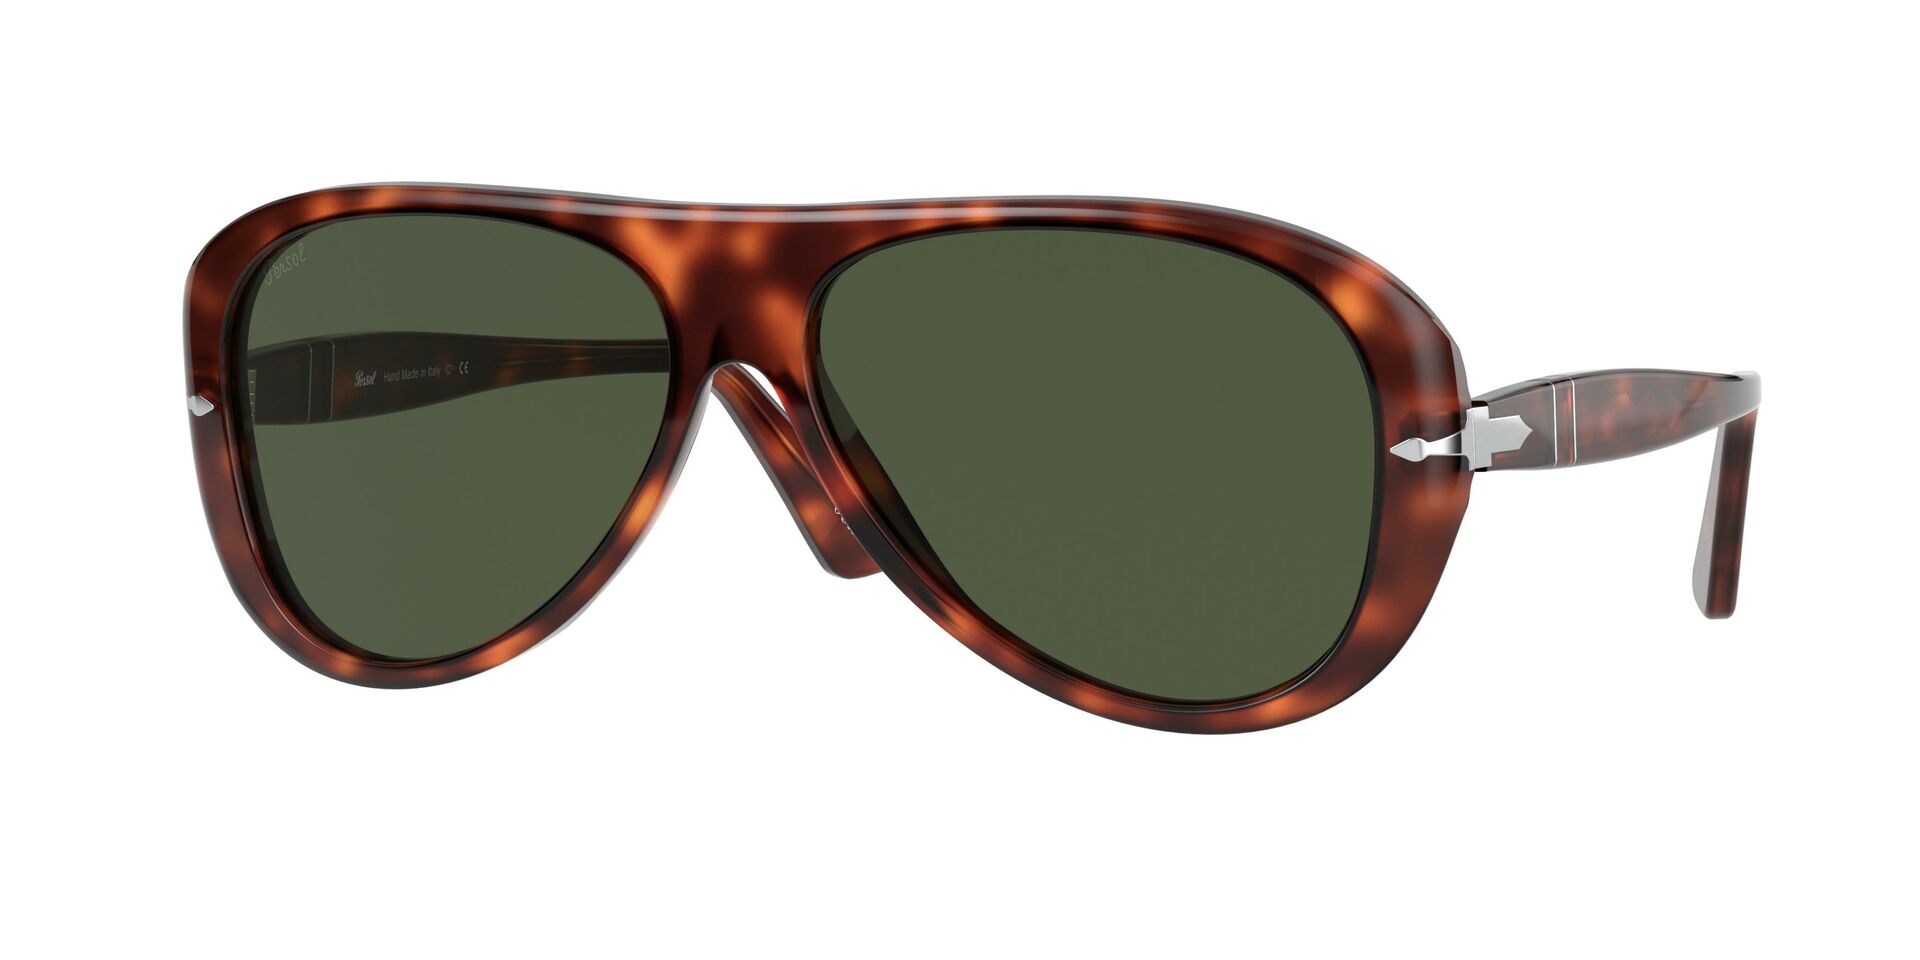 Persol Revived Jude Law's Sunglasses from “The Talented Mr. Ripley” – Robb  Report